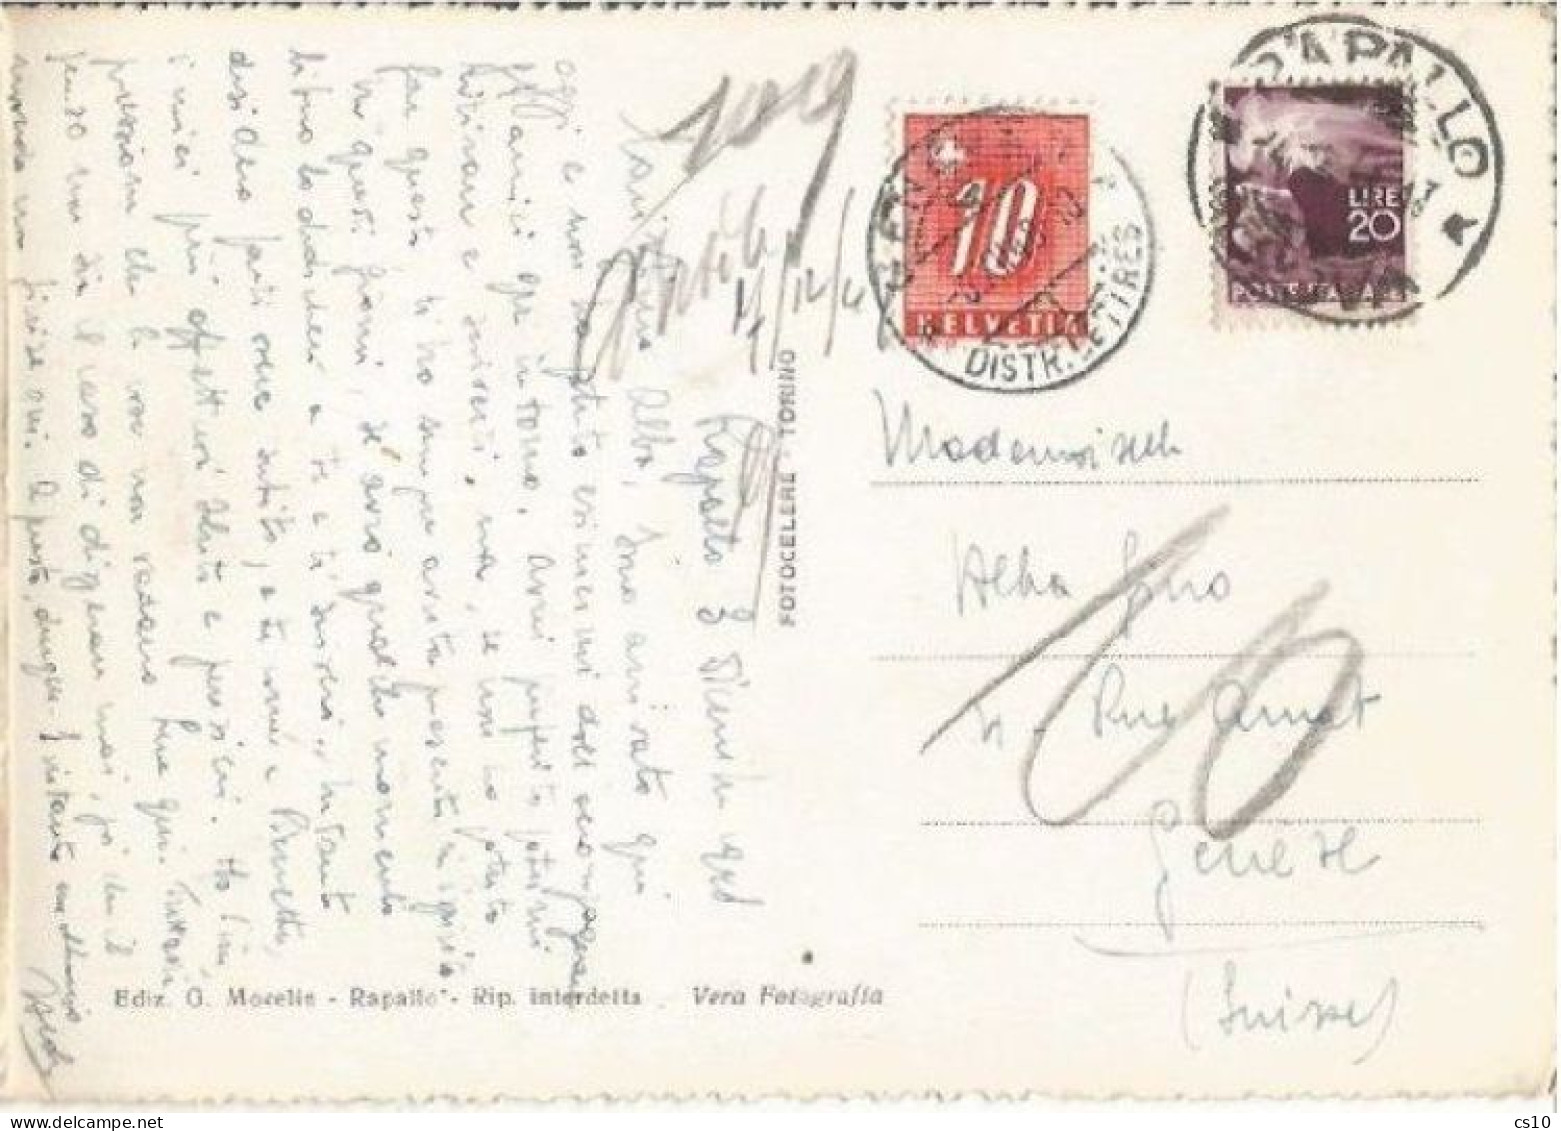 Suisse Postage Due Tax C.10 On Pcard Italy 1948 - Postage Due